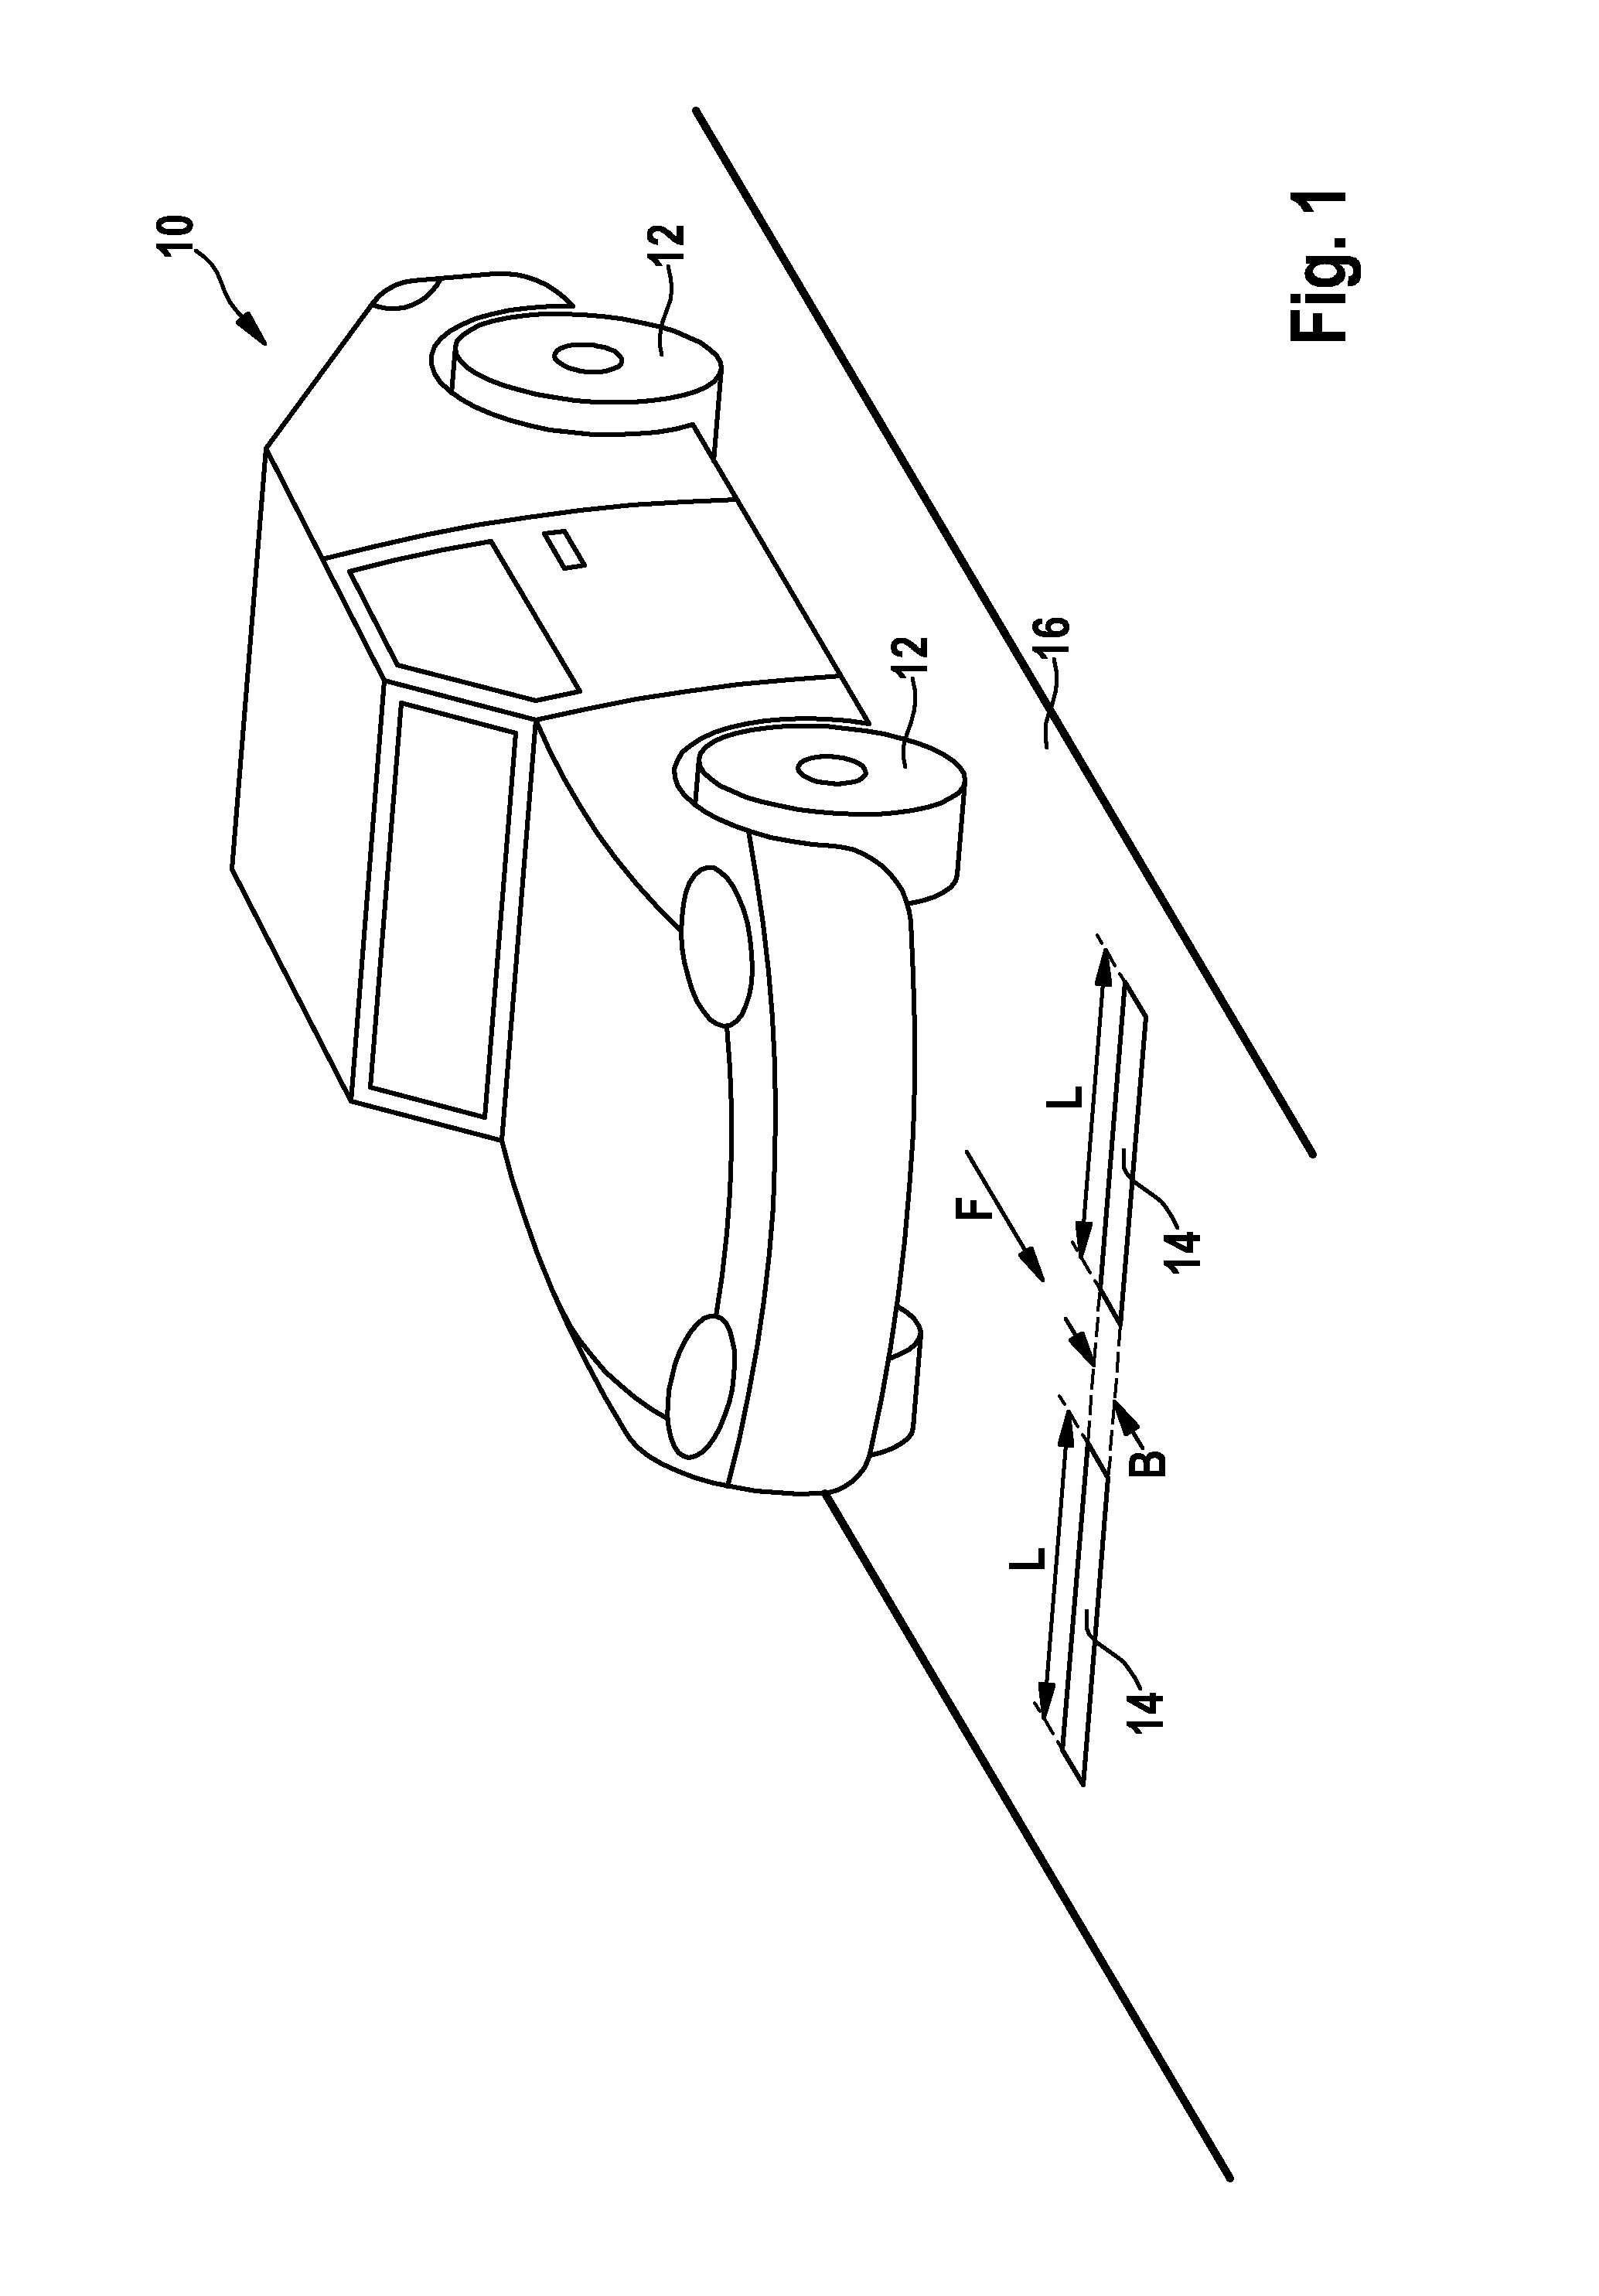 Device and method for monitoring and calibrating a device for measuring the profile depth of a tyre